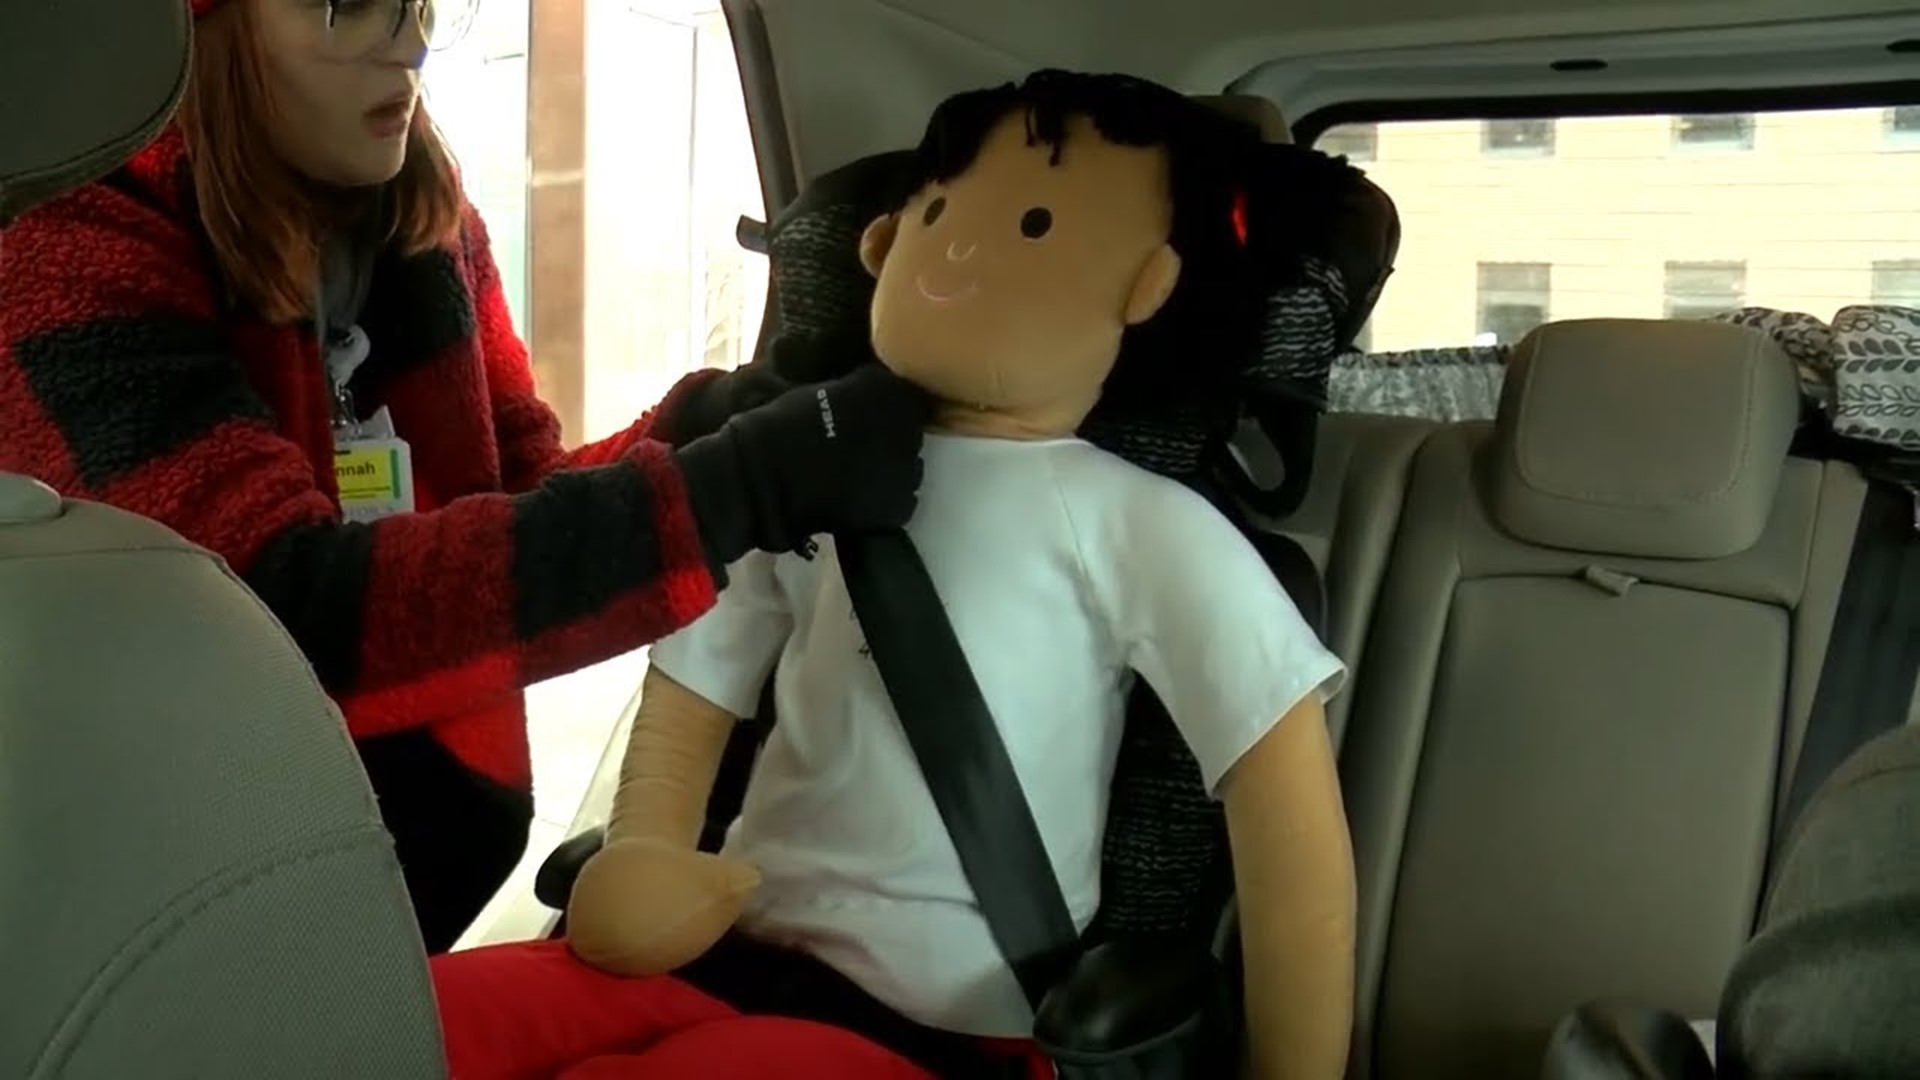 Passenger Safety Week focuses on all passengers in a vehicle. Hannah Eberlein, the KISS Carseat Program coordinator, explains how to keep passengers safe.